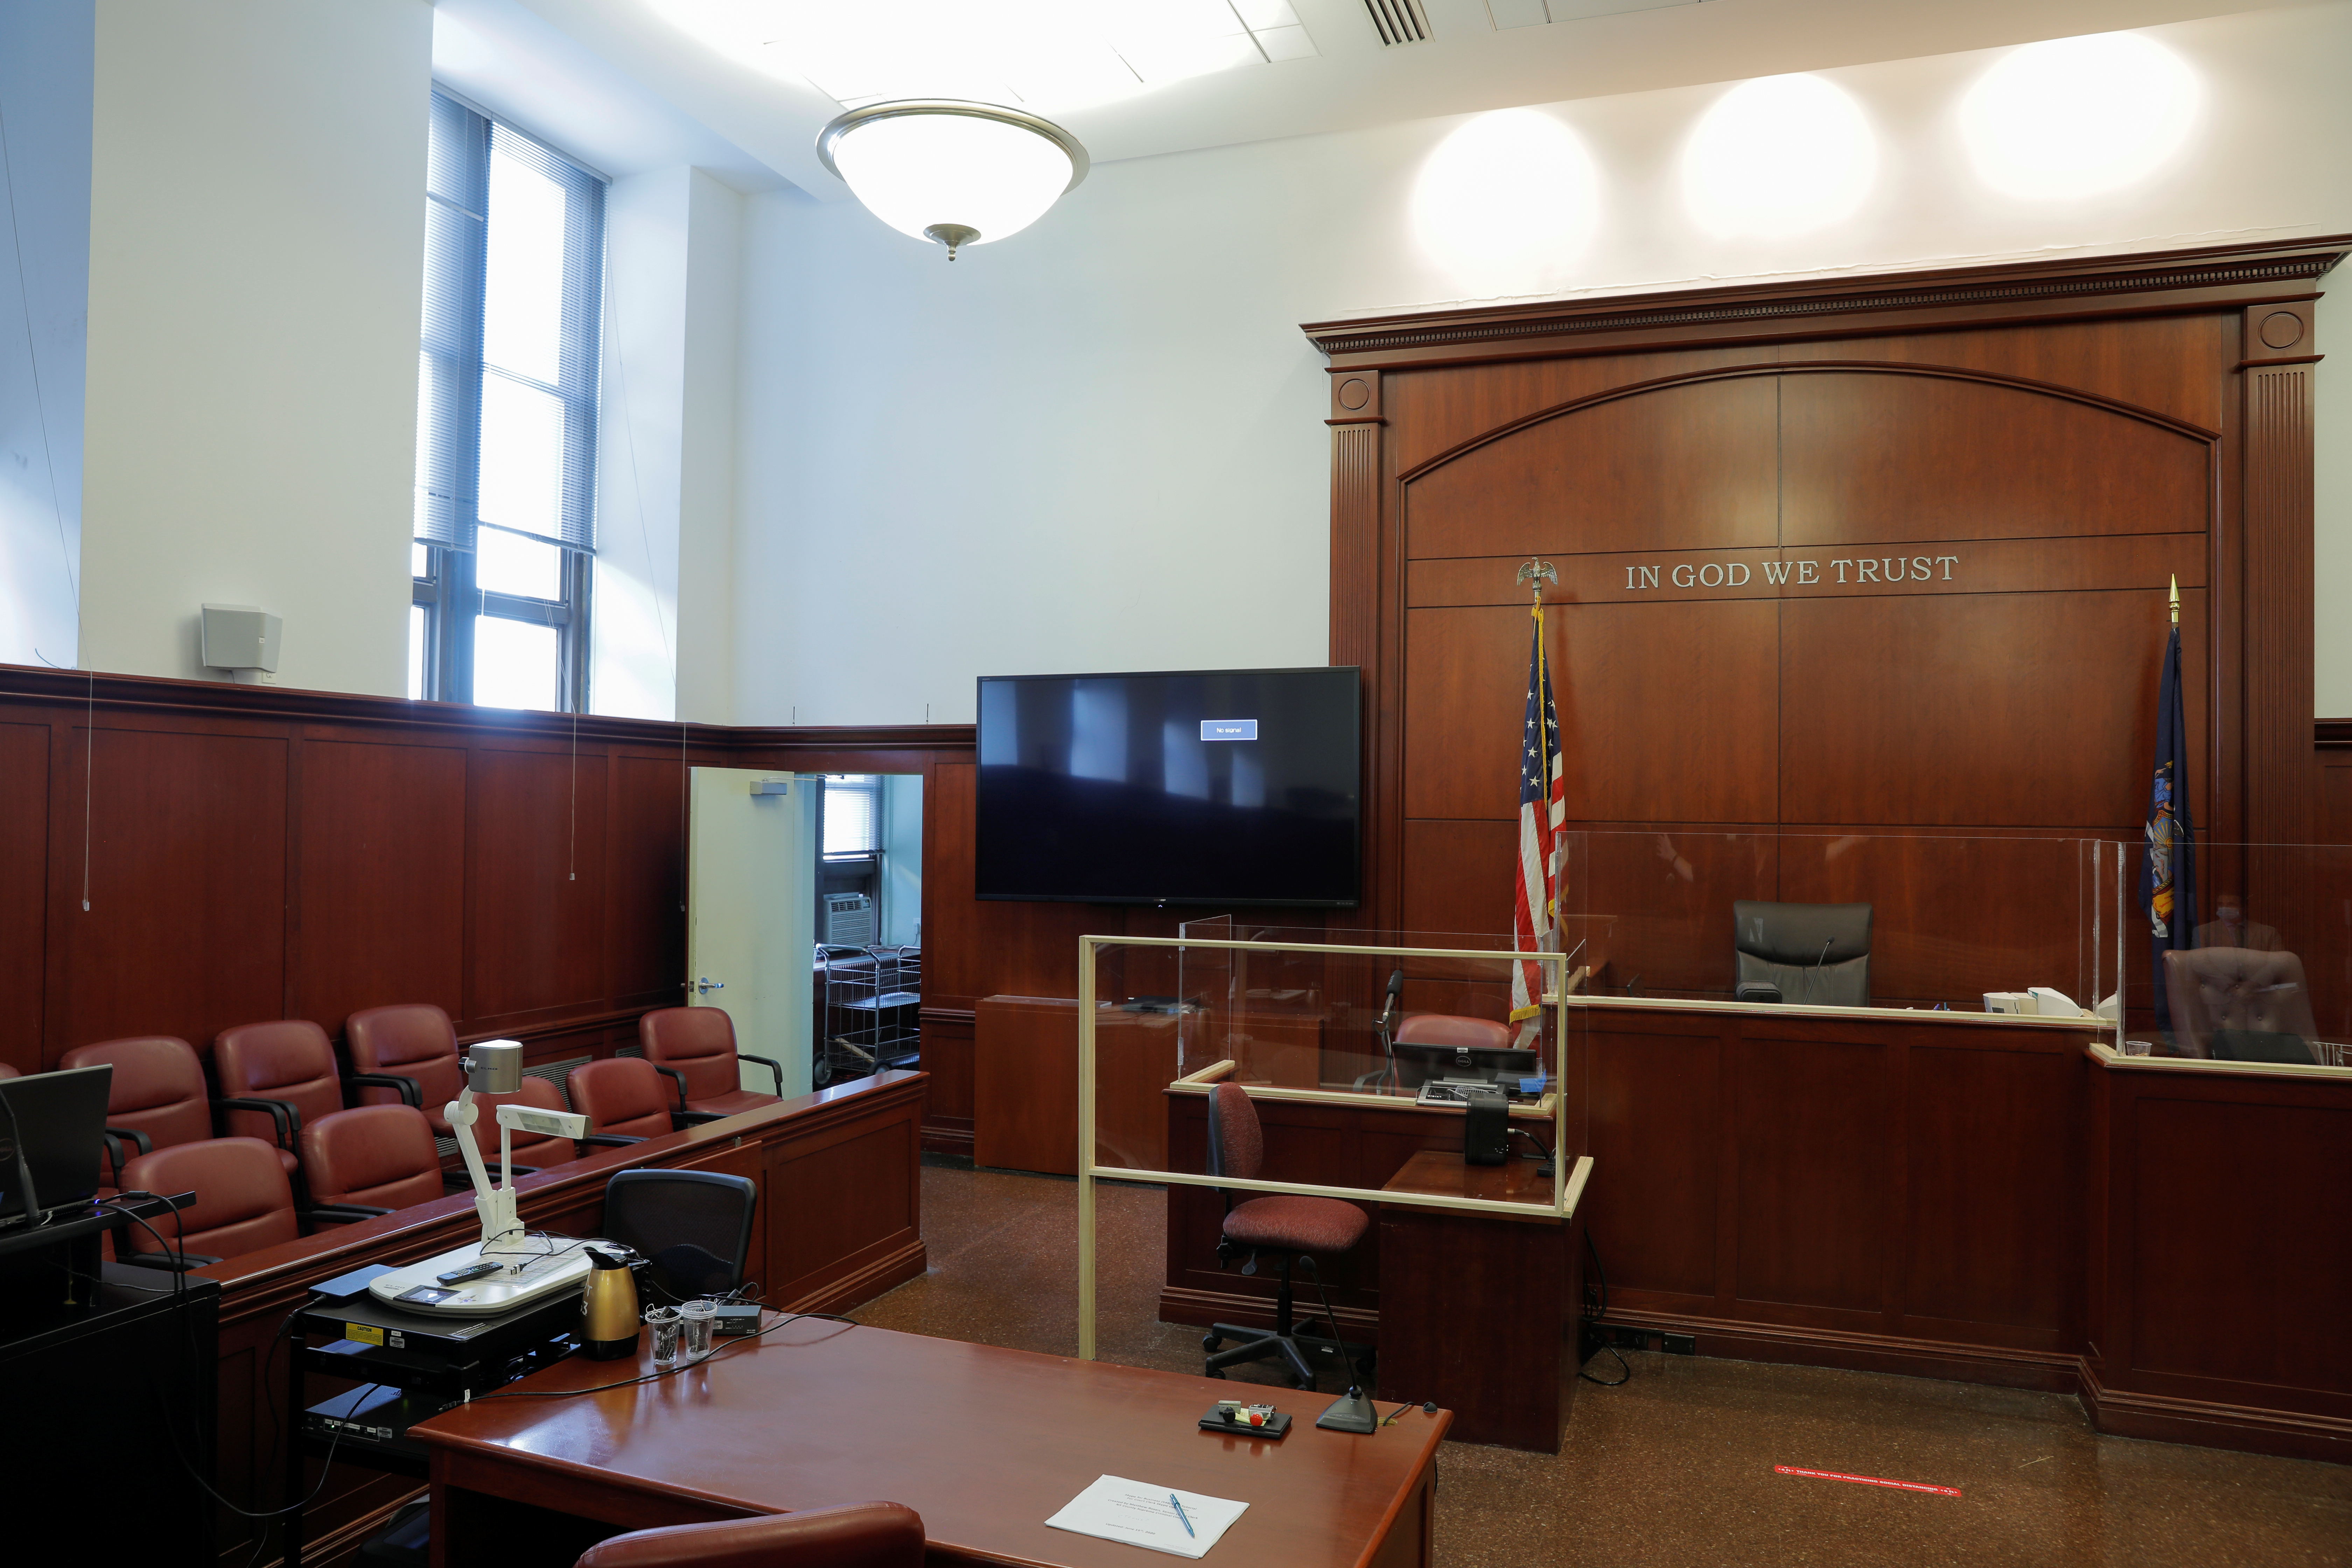 The jury box, the well and the judge's bench are seen at the New York State Supreme Court in Manhattan, New York City